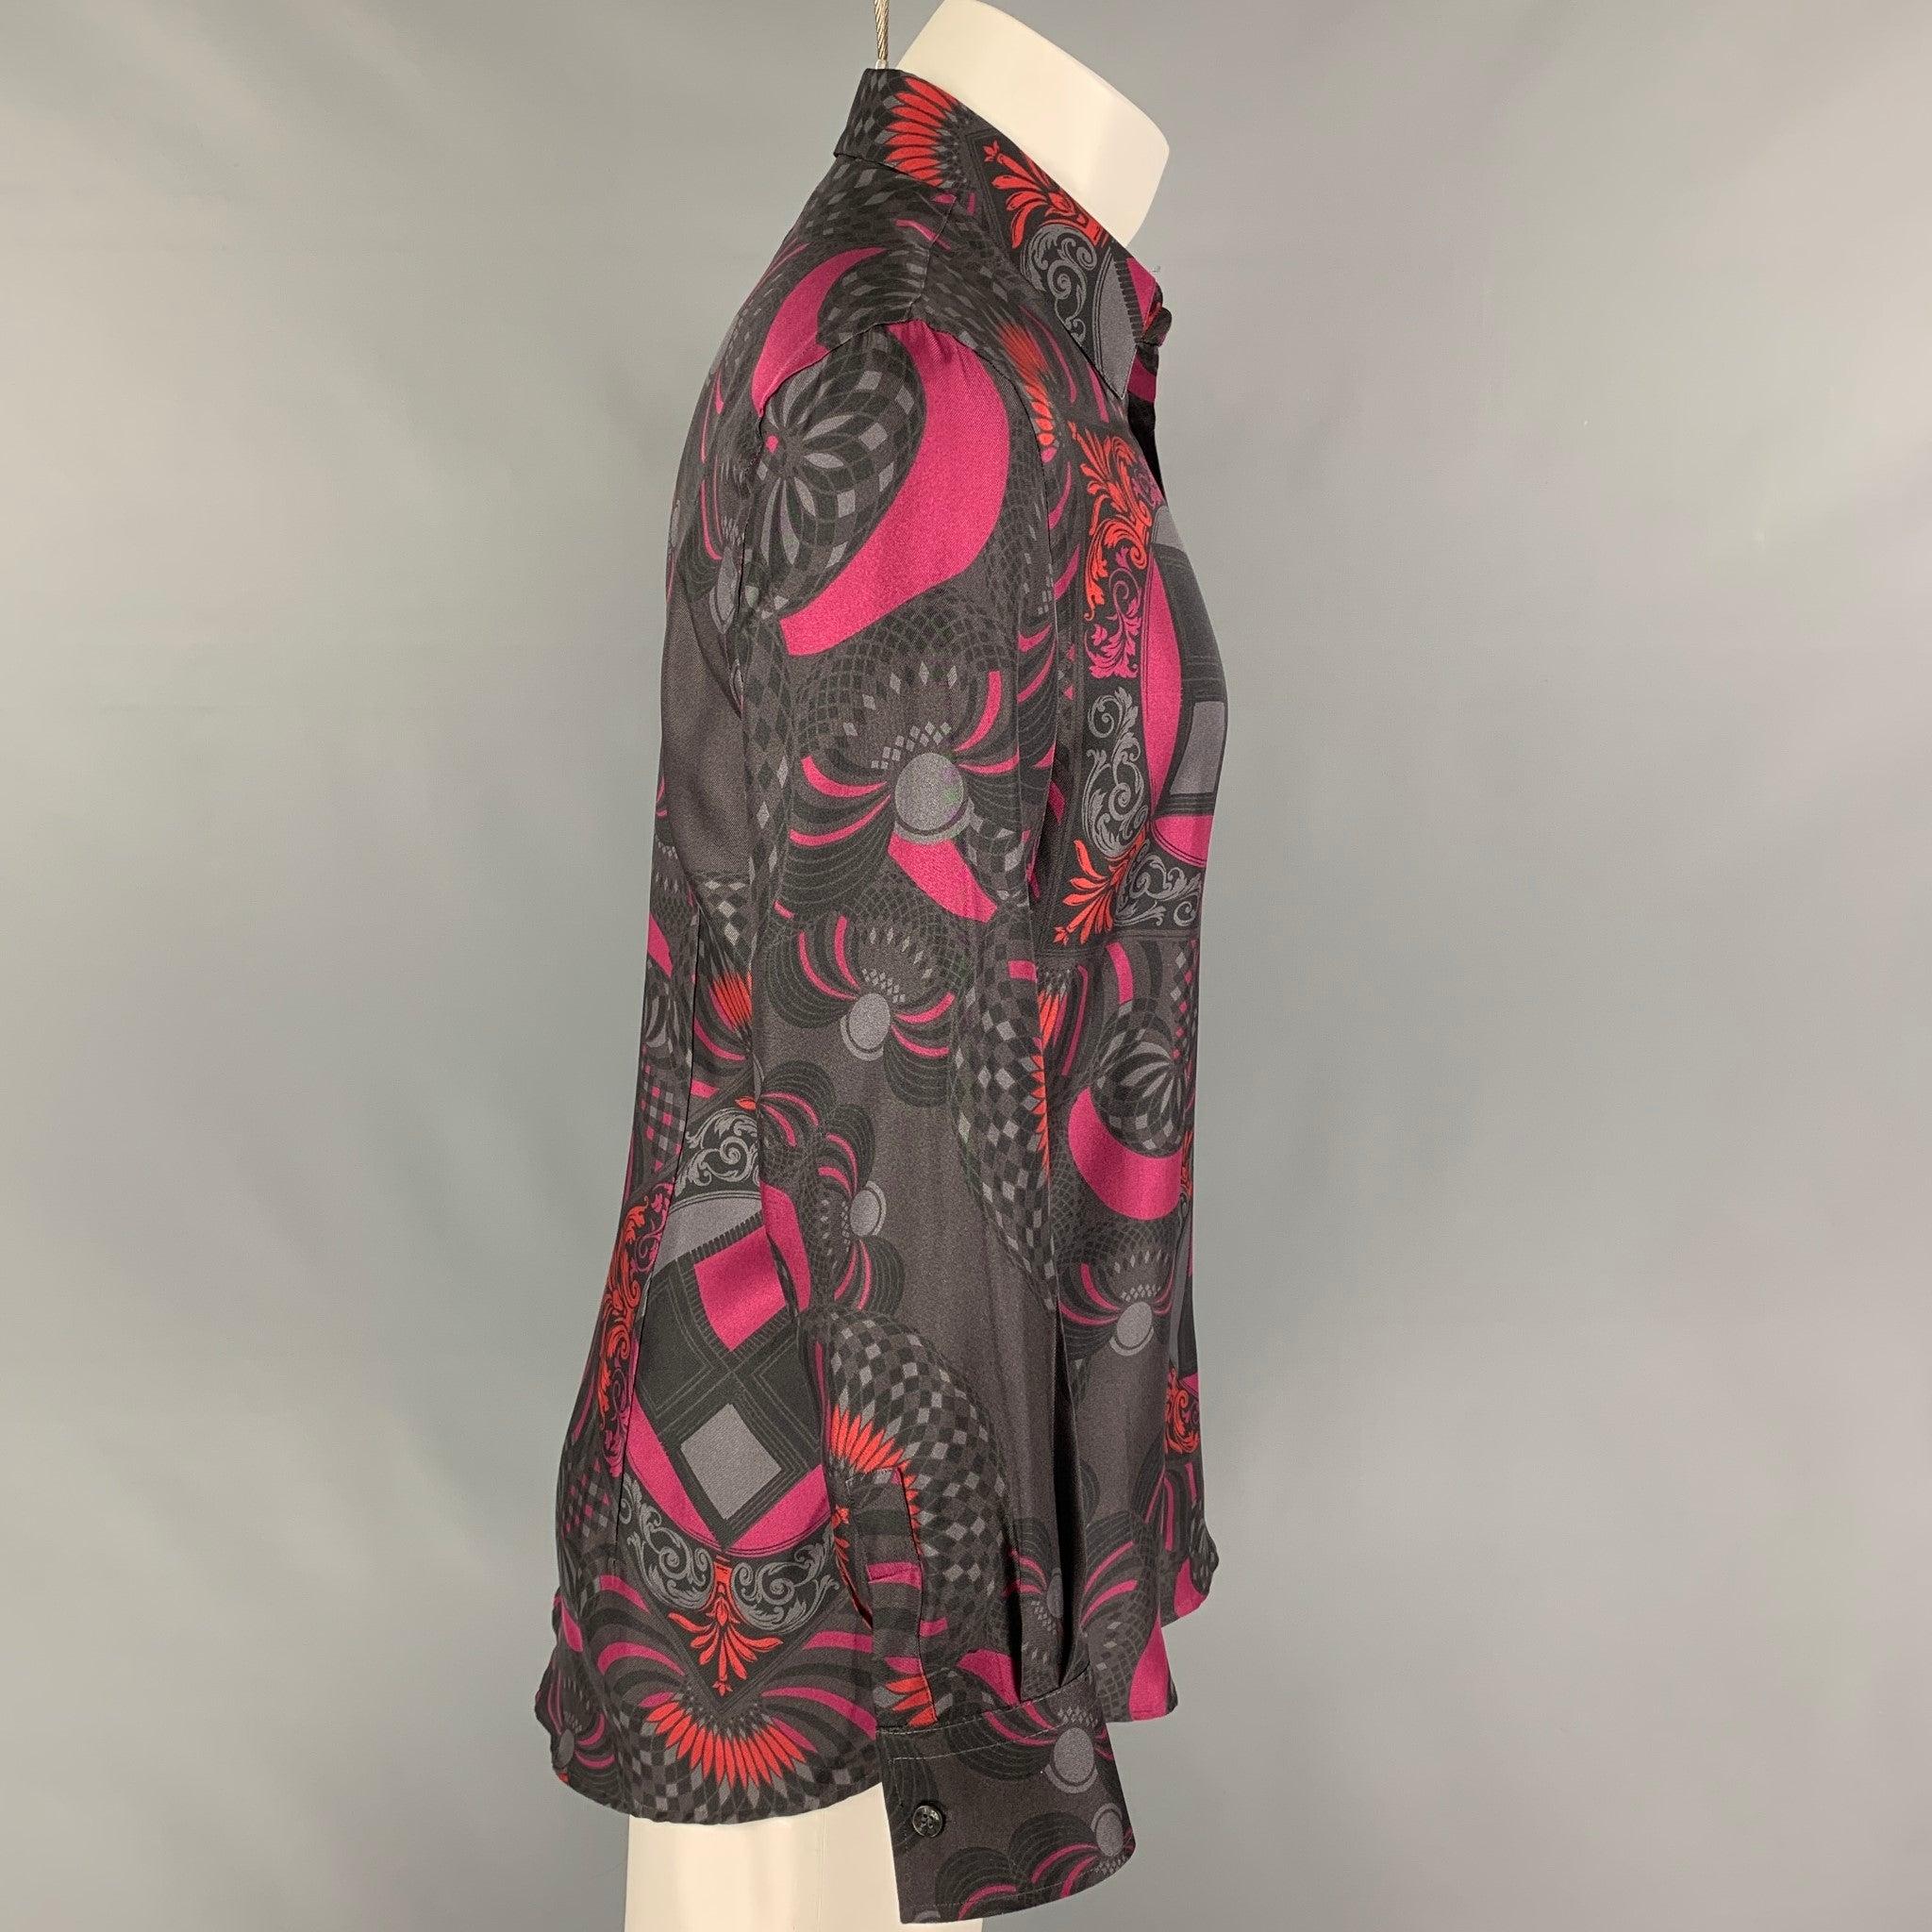 VERSACE COLLECTION long sleeve shirt comes in a dark gray& magenta print silk featuring a spread collar and a button up closure.
Very Good
Pre-Owned Condition. 

Marked:   15.5/39 

Measurements: 
 
Shoulder: 18 inches Chest: 40 inches Sleeve: 22.5